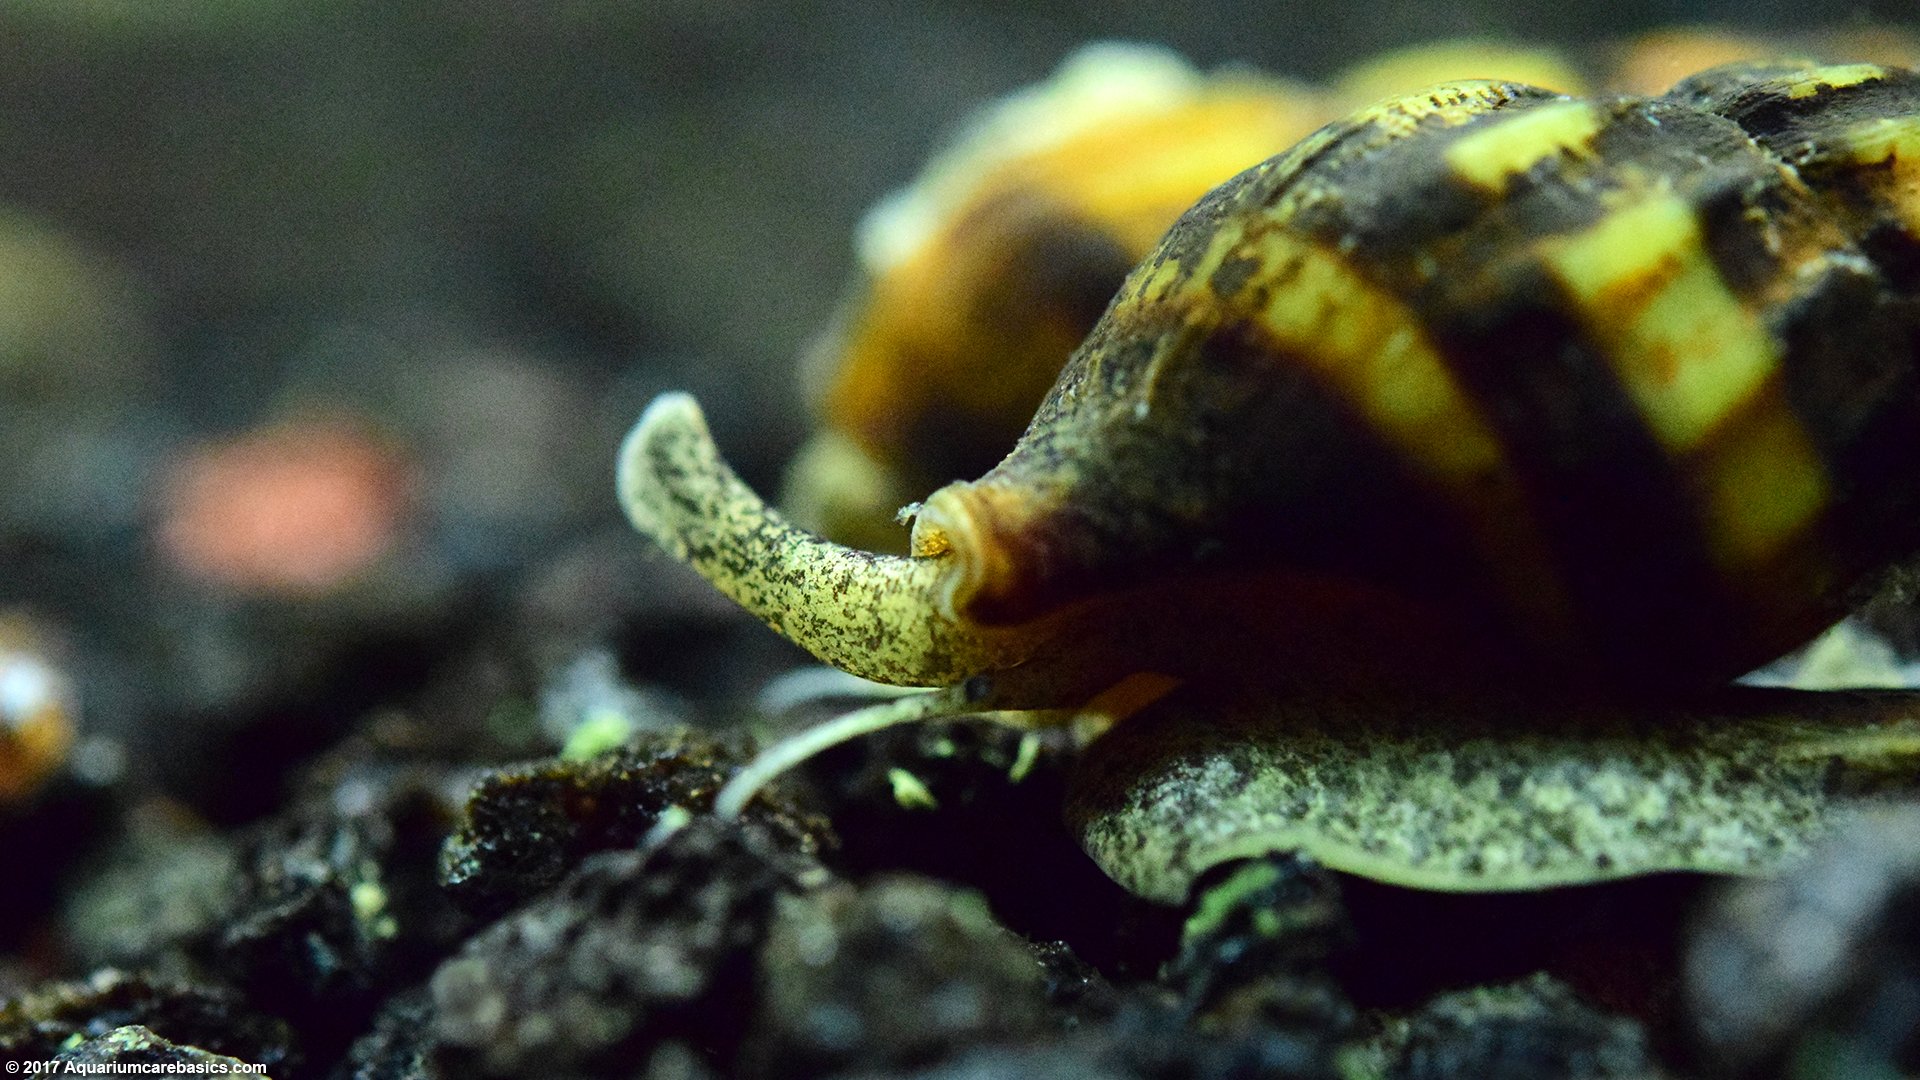 Gallery Of Assassin Snail Pictures.